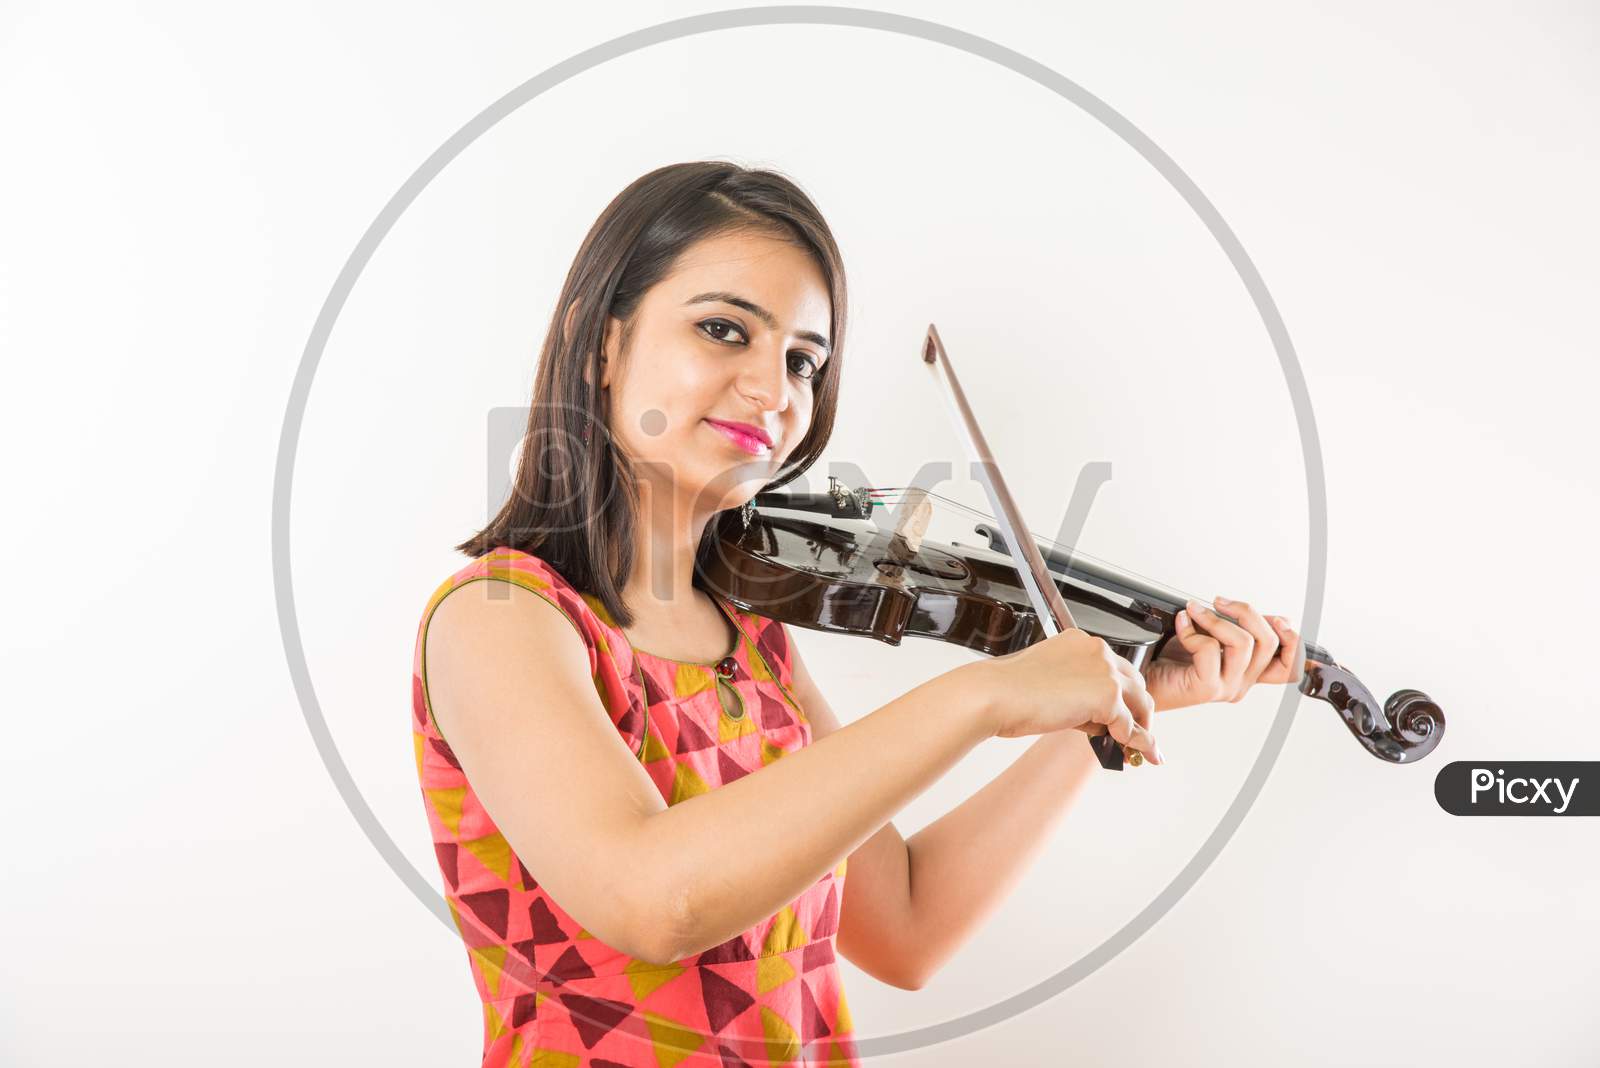 Pretty Indian/Asian young Girl musician playing Violin against white background